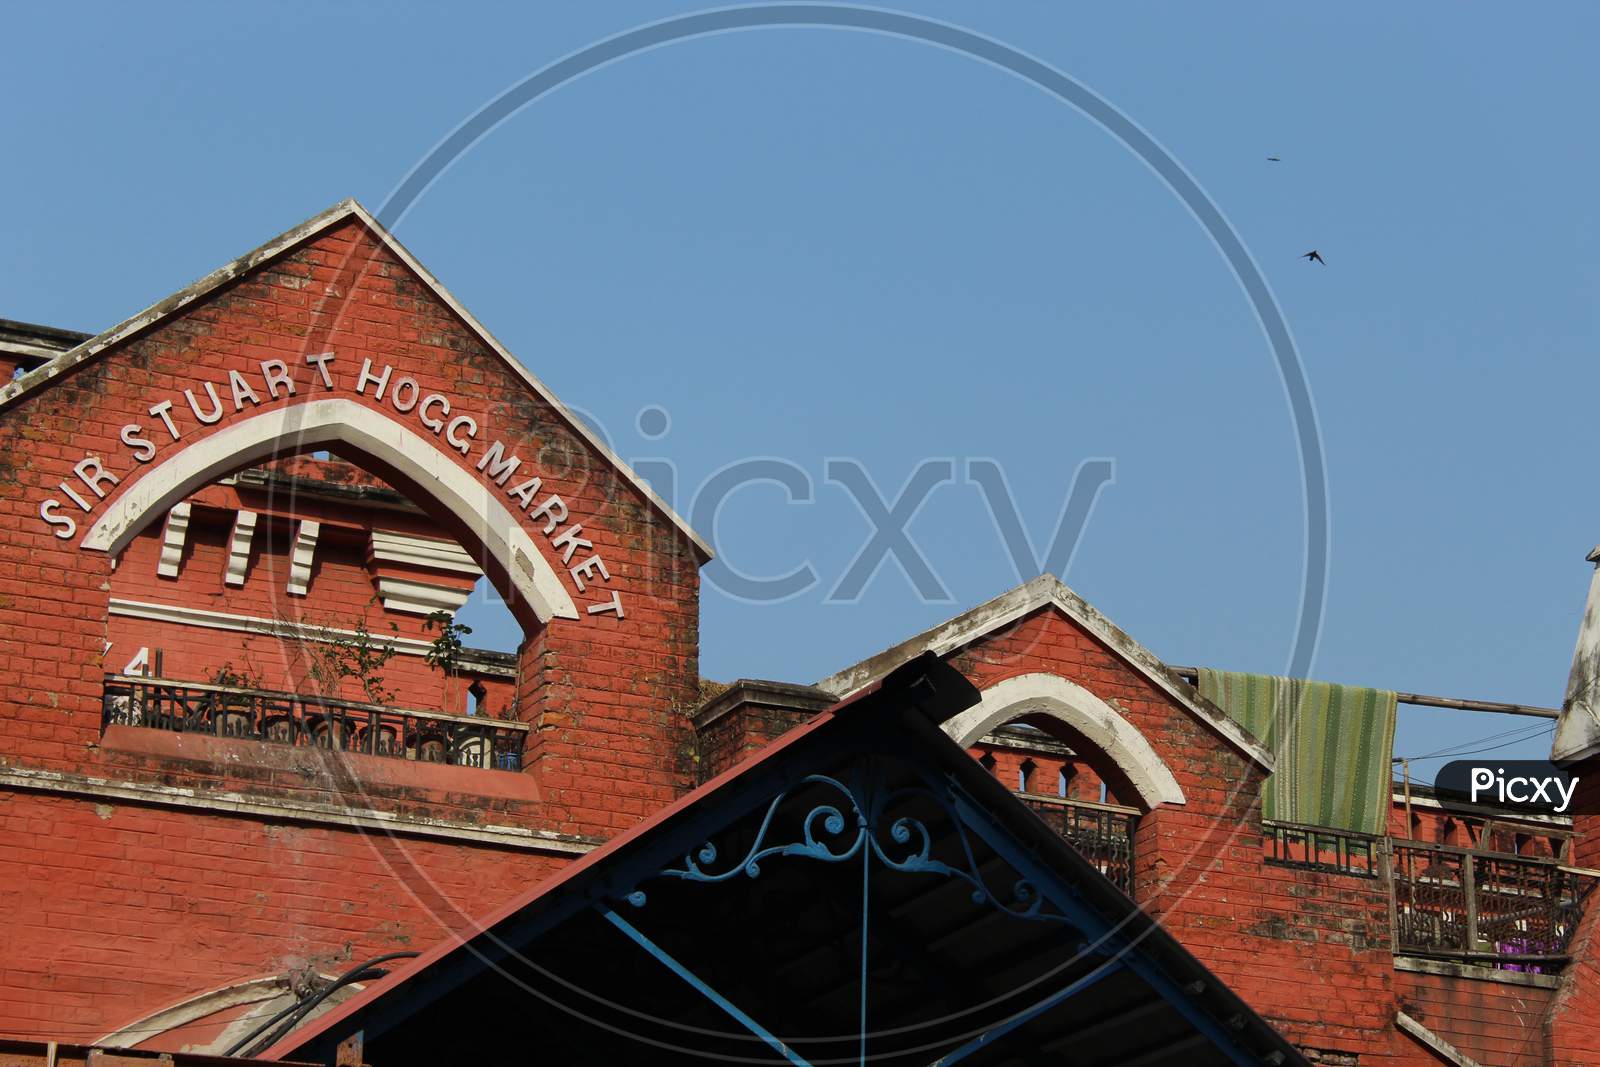 Cropped and partial view of famous 'S.S. Hog Market', at Esplanade East, Kolkata, West Bengal 700069.